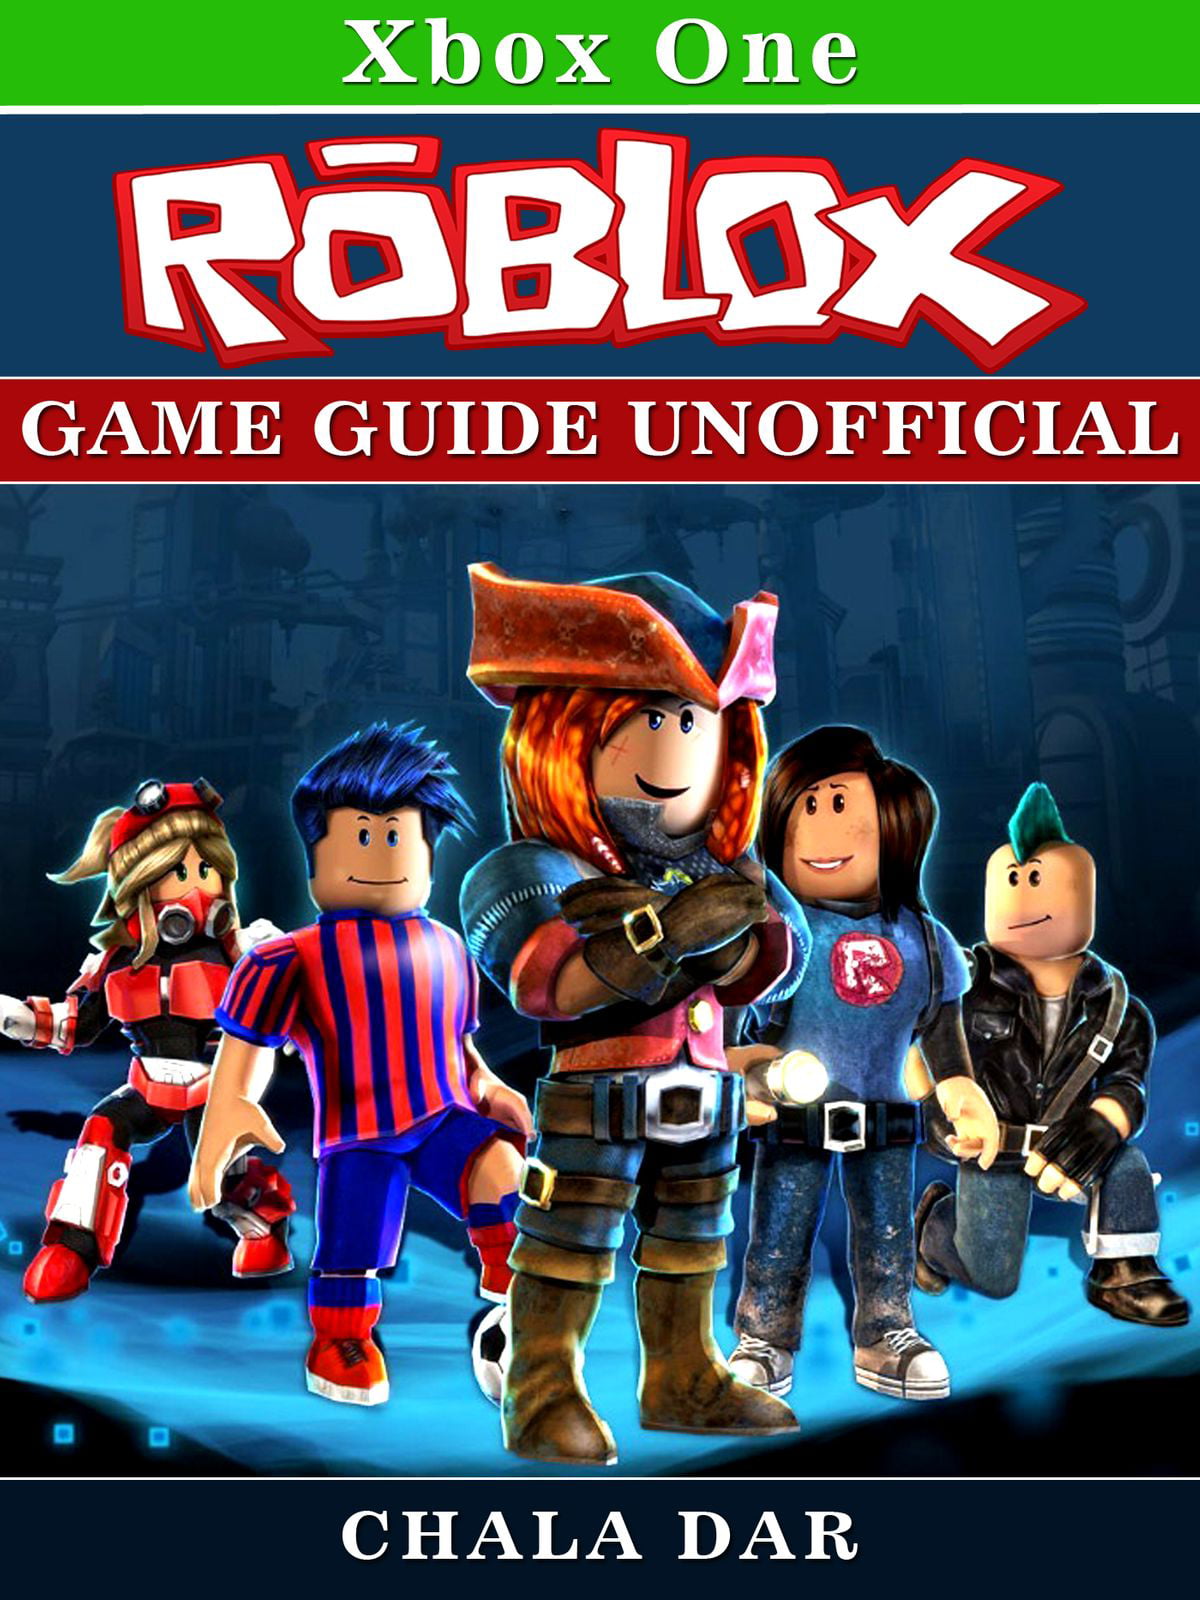 Roblox Xbox One Game Guide Unofficial Ebook Walmart Com Walmart Com - how to accept friend request on xbox roblox